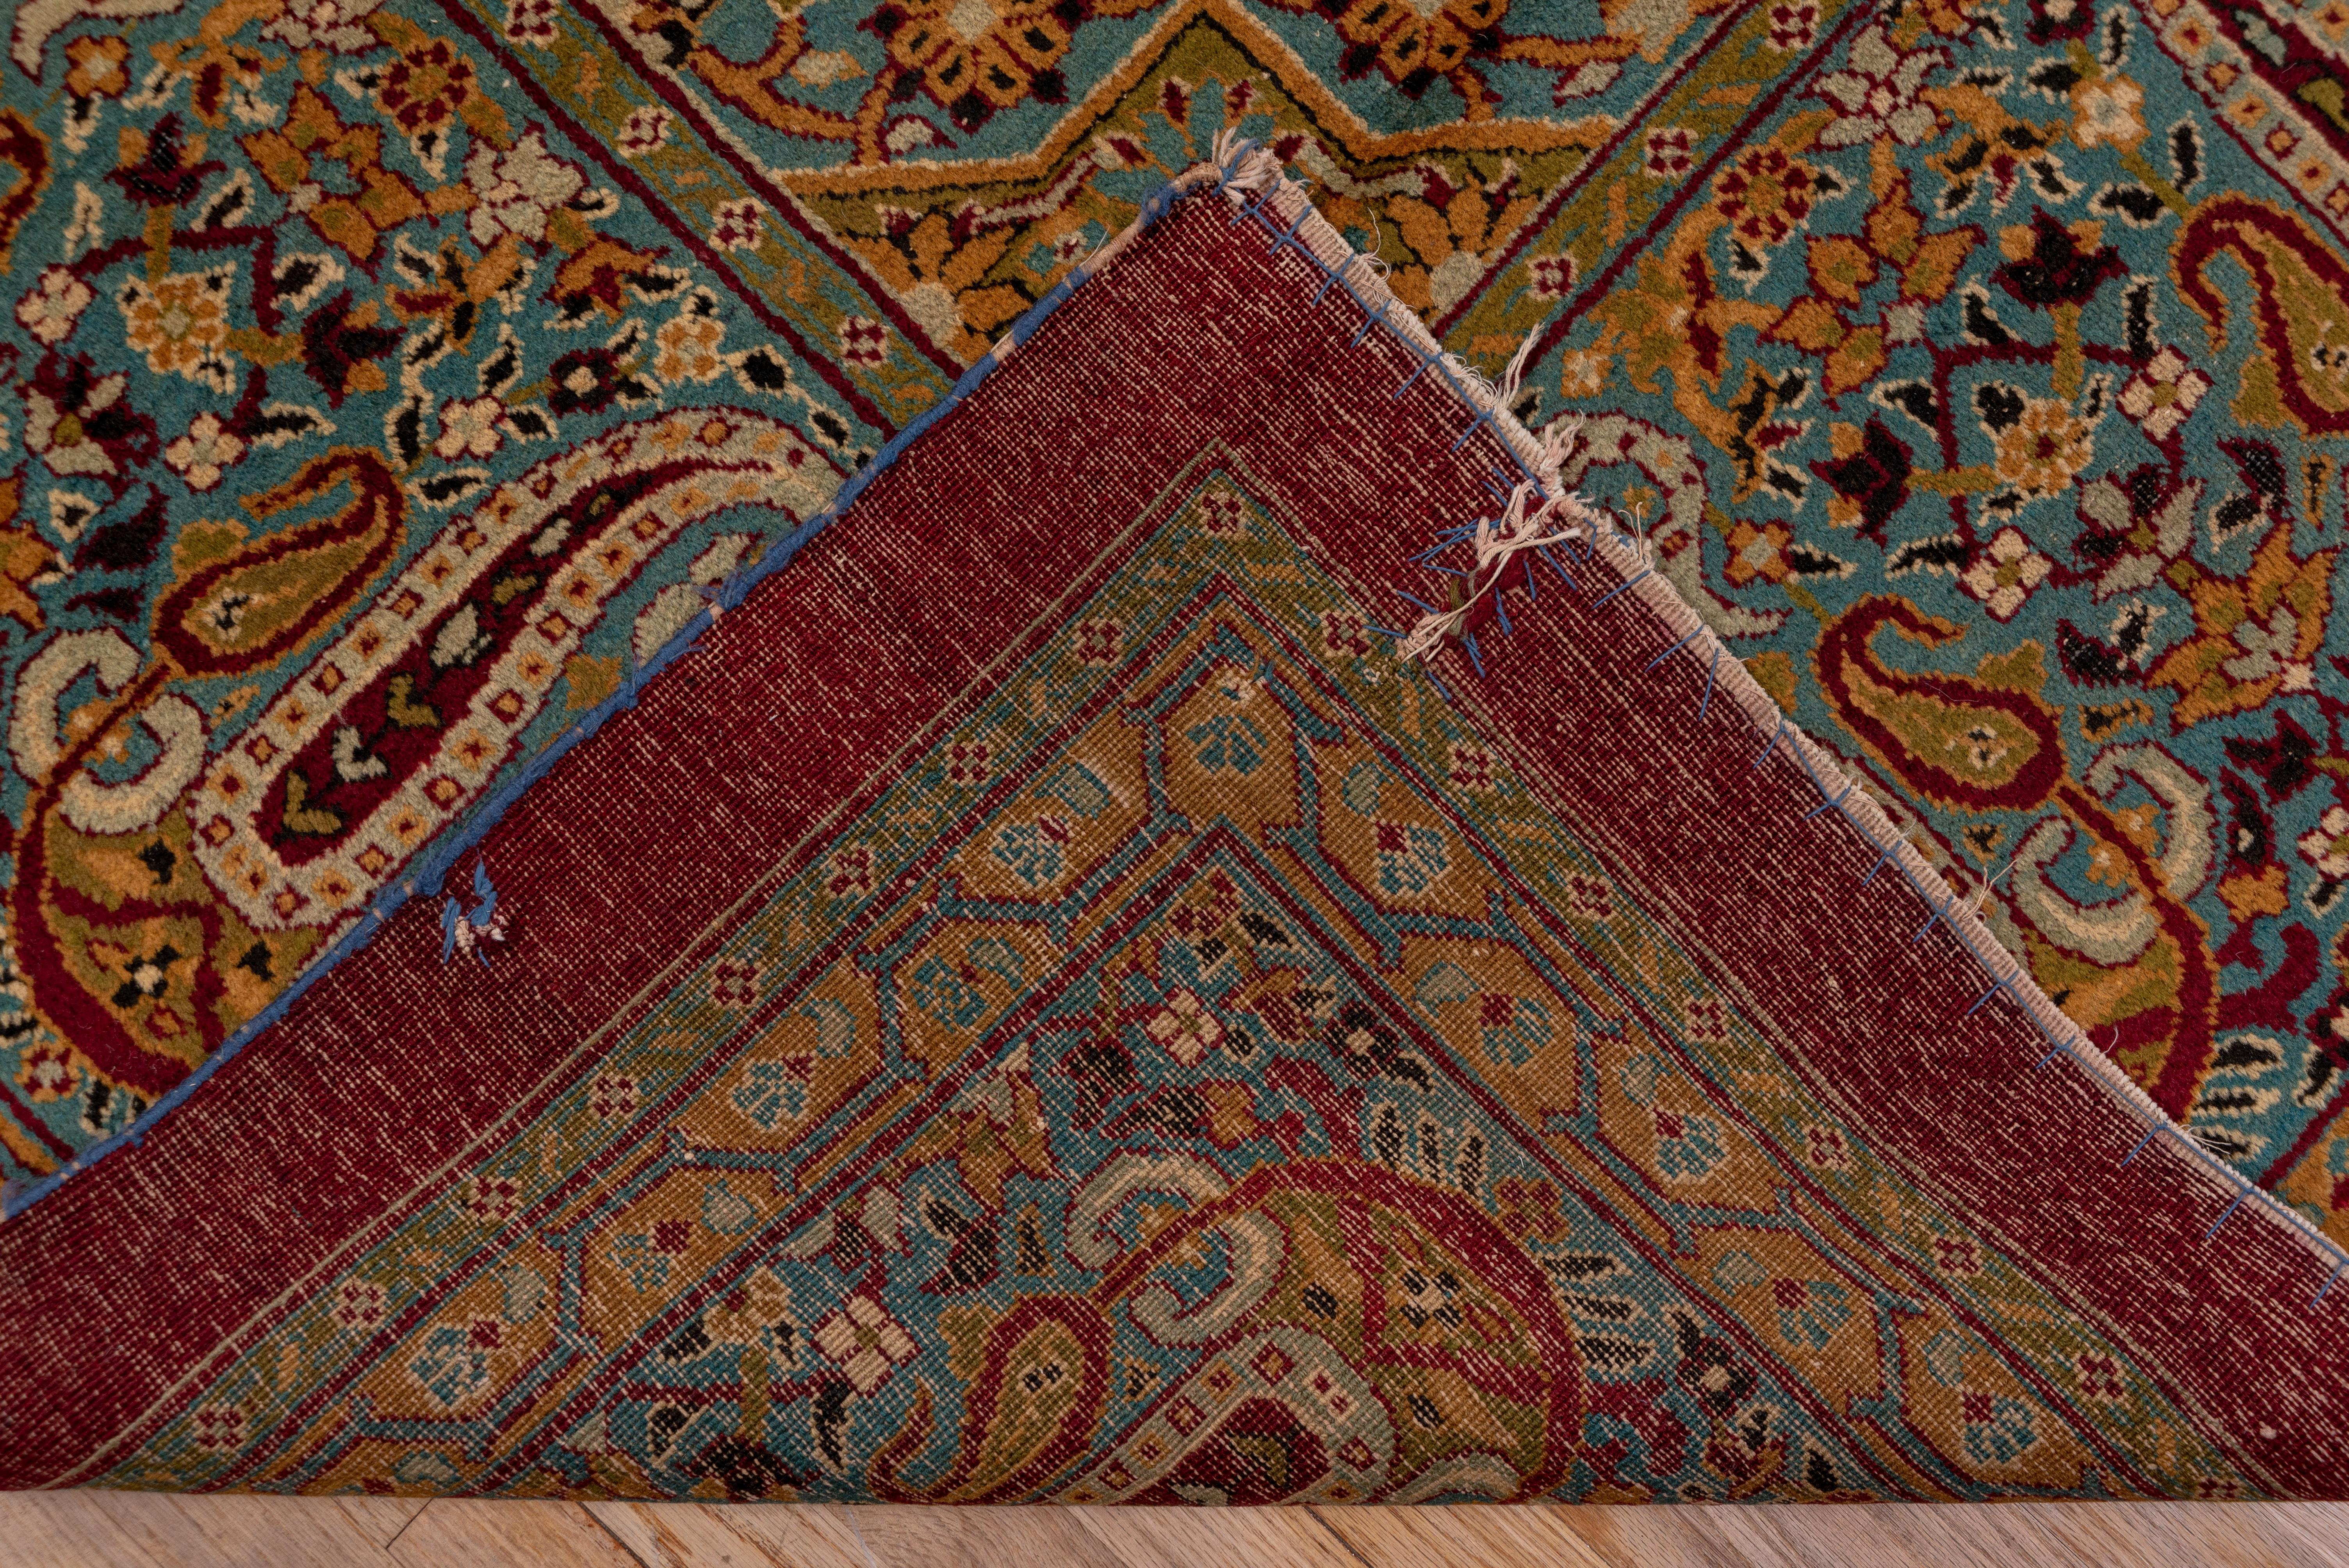 Early 20th Century Antique Indian Amritzar Square Carpet, Burgundy Field, Multicolored Borders For Sale